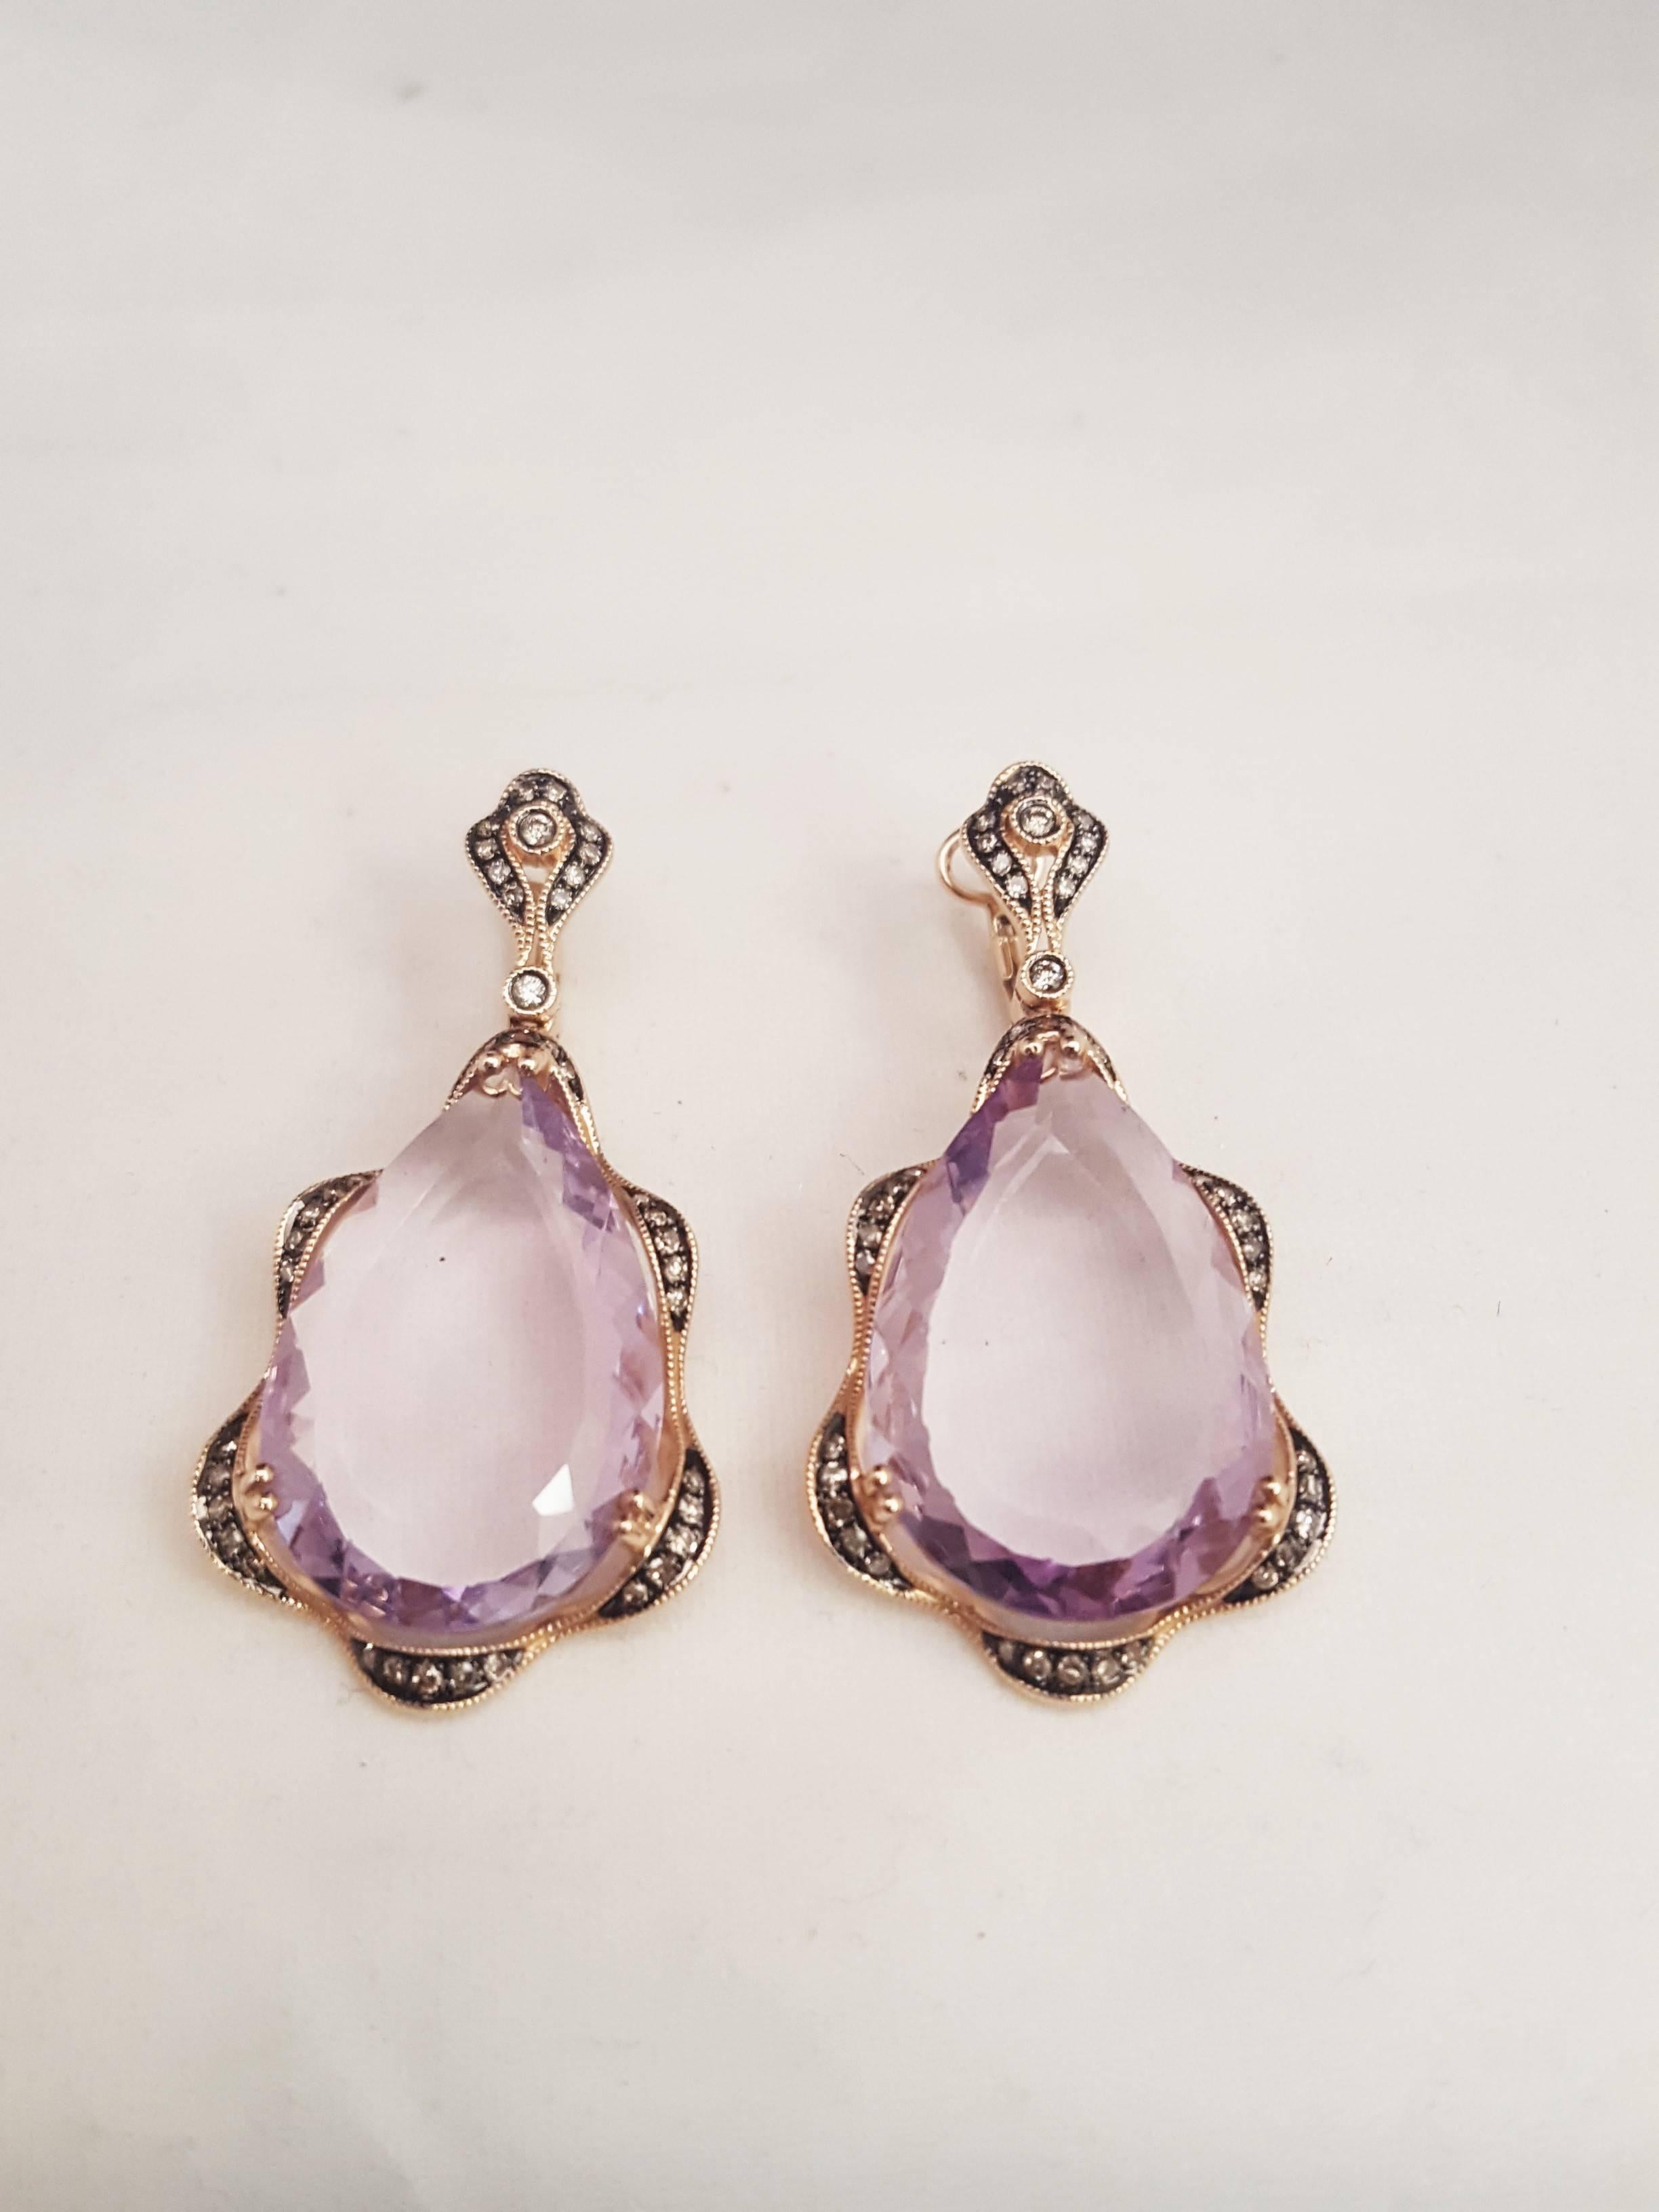 The distinct look of old world beauty!  Beautifully designed in 14 karat rose gold, these drop earrings are absolutely stunning!
An impressive 11mm x 20mm checkerboard side faceted amethyst being the focal point.  Framework boasts milgrain edges